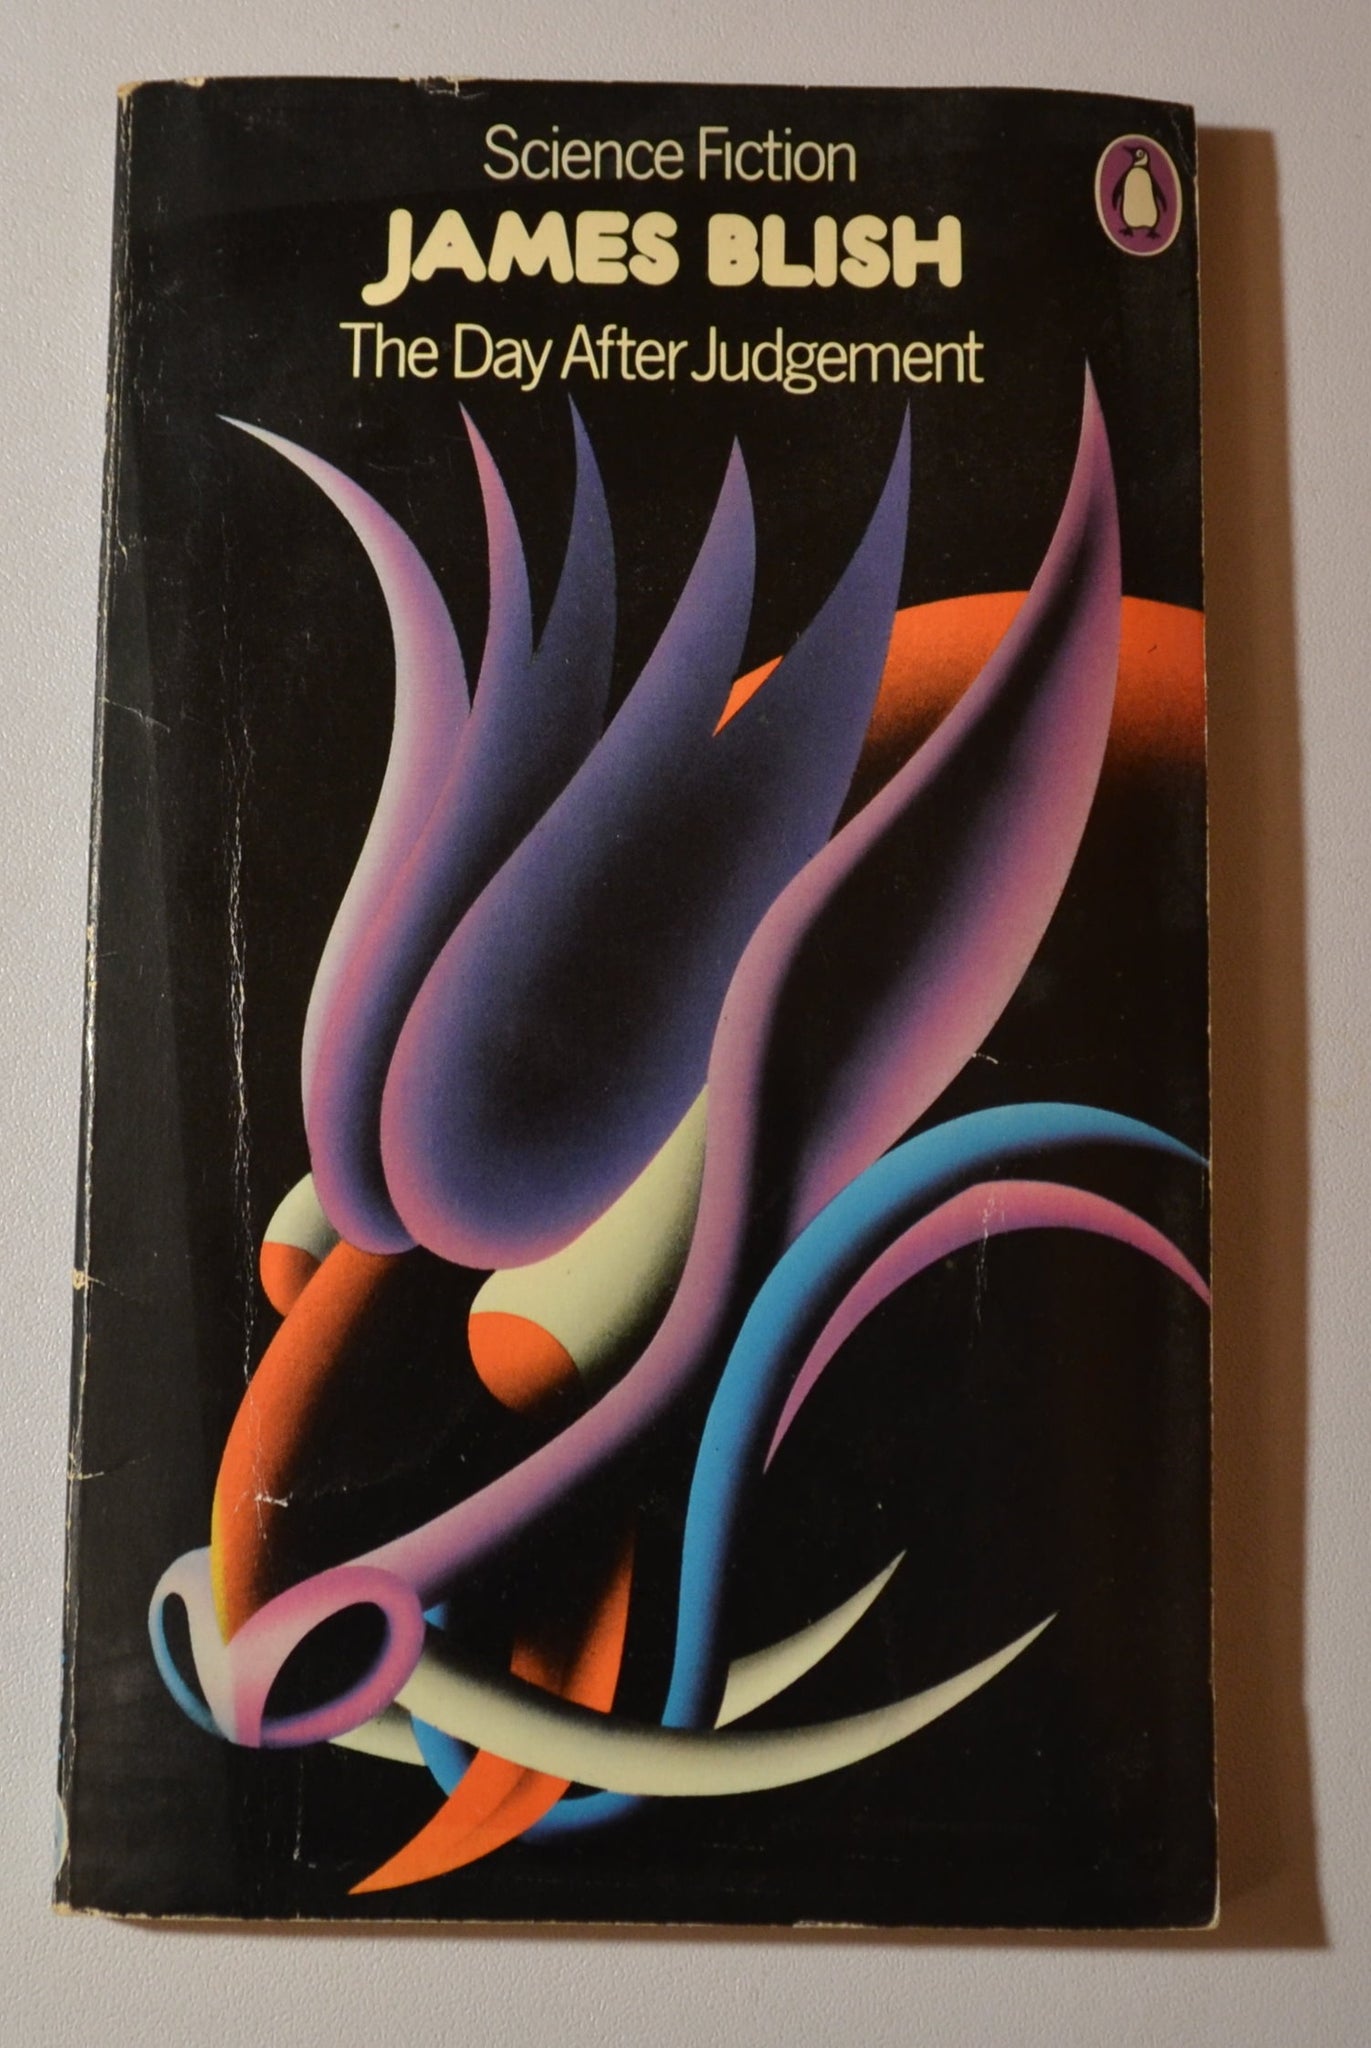 The Day After Judgement - After Such Knowledge book 3